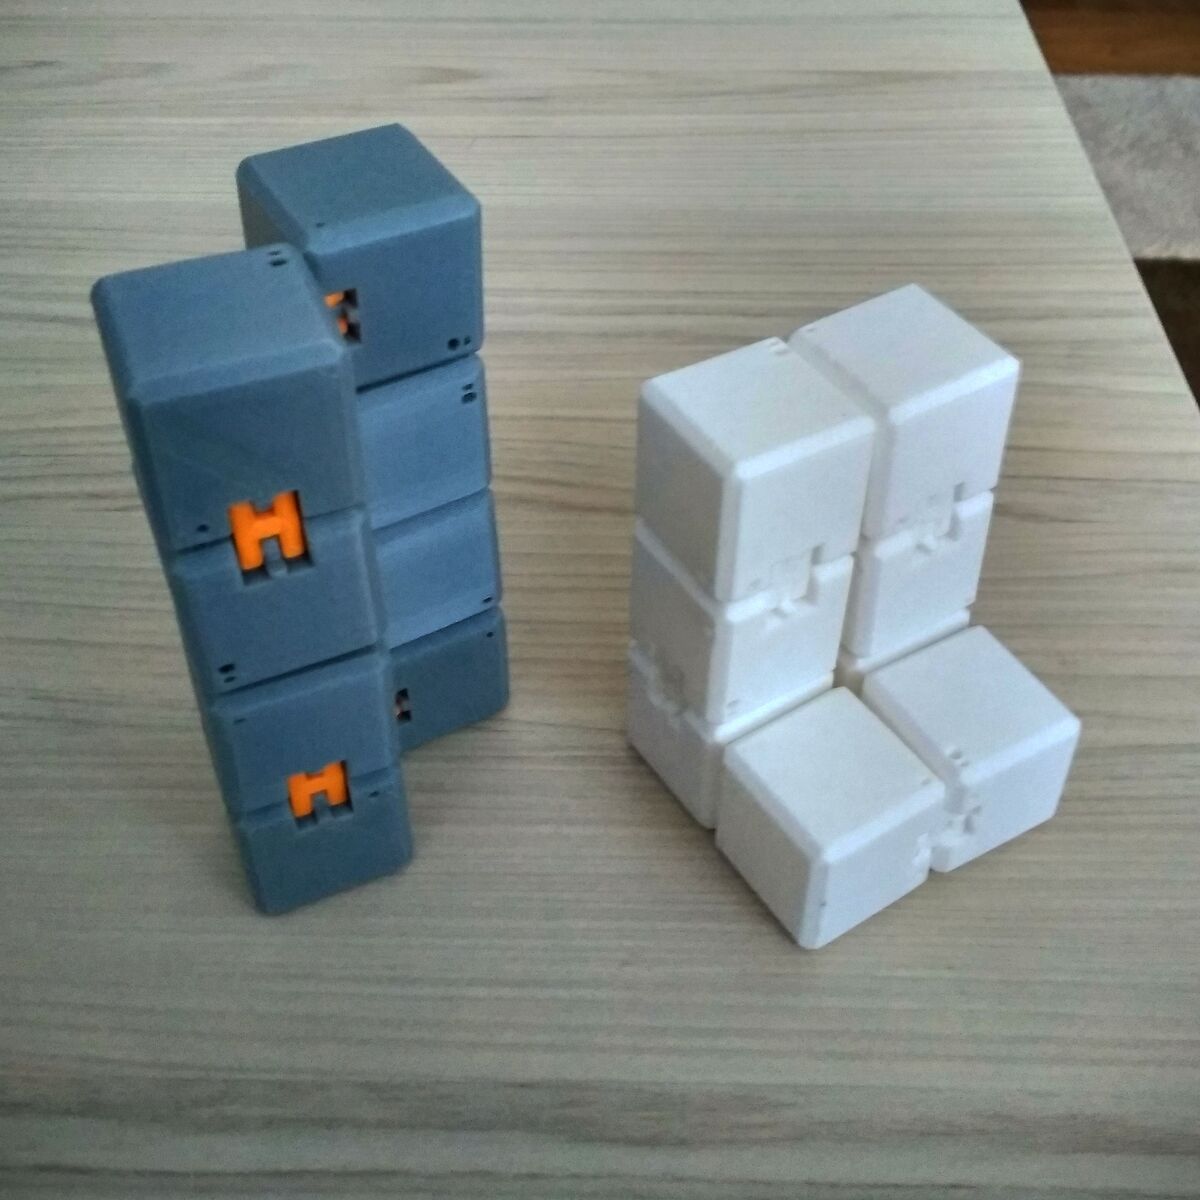 Buy Infinity cube online from